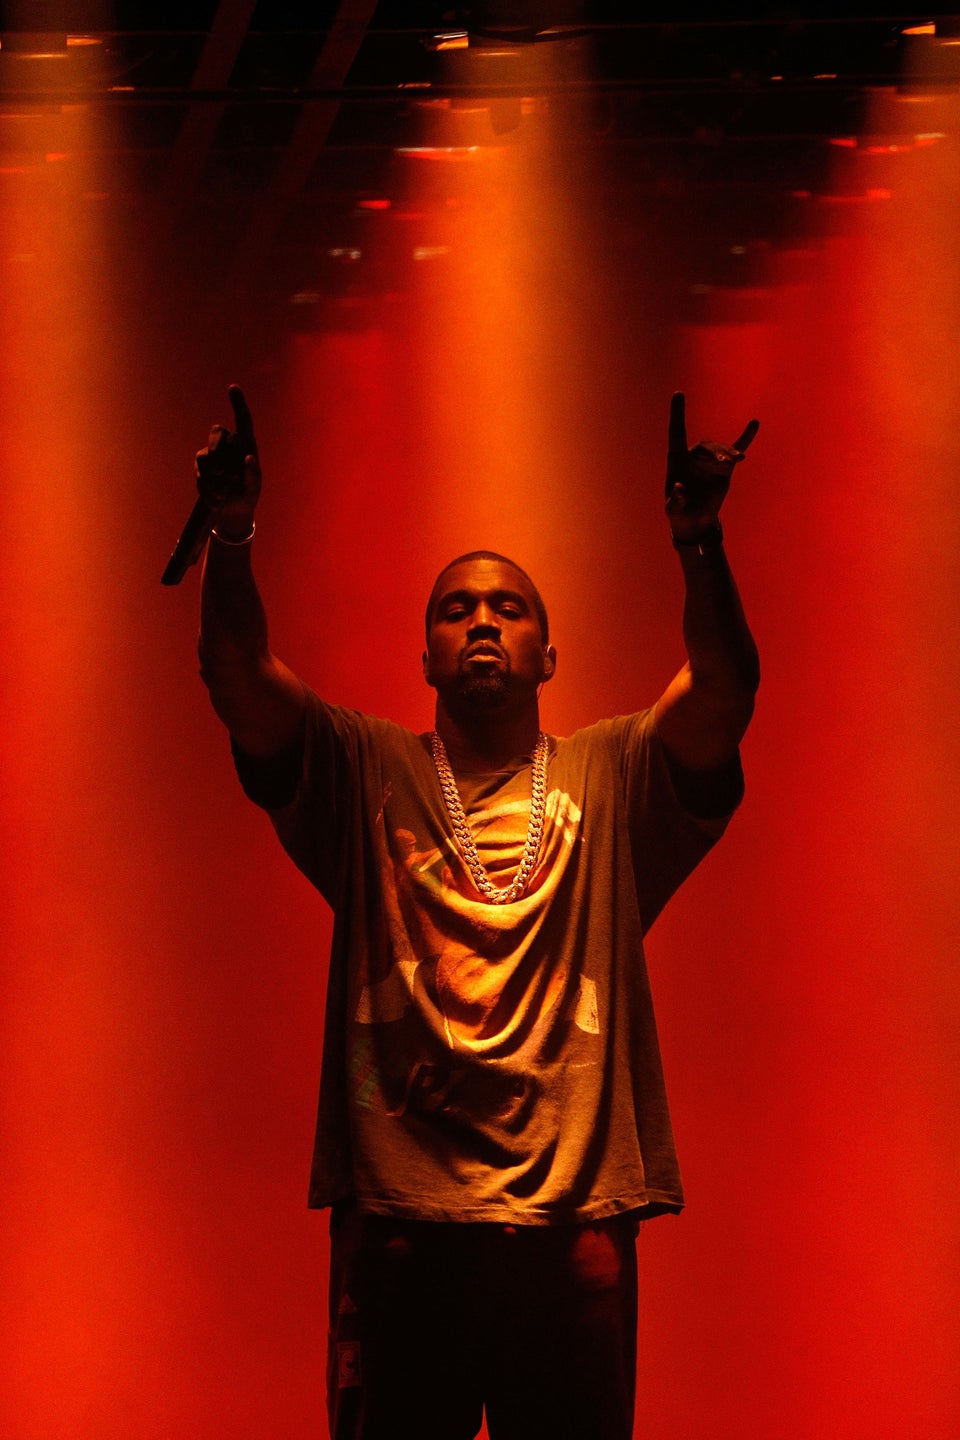 Meet YE: The Rapper Formerly Known As Kanye West